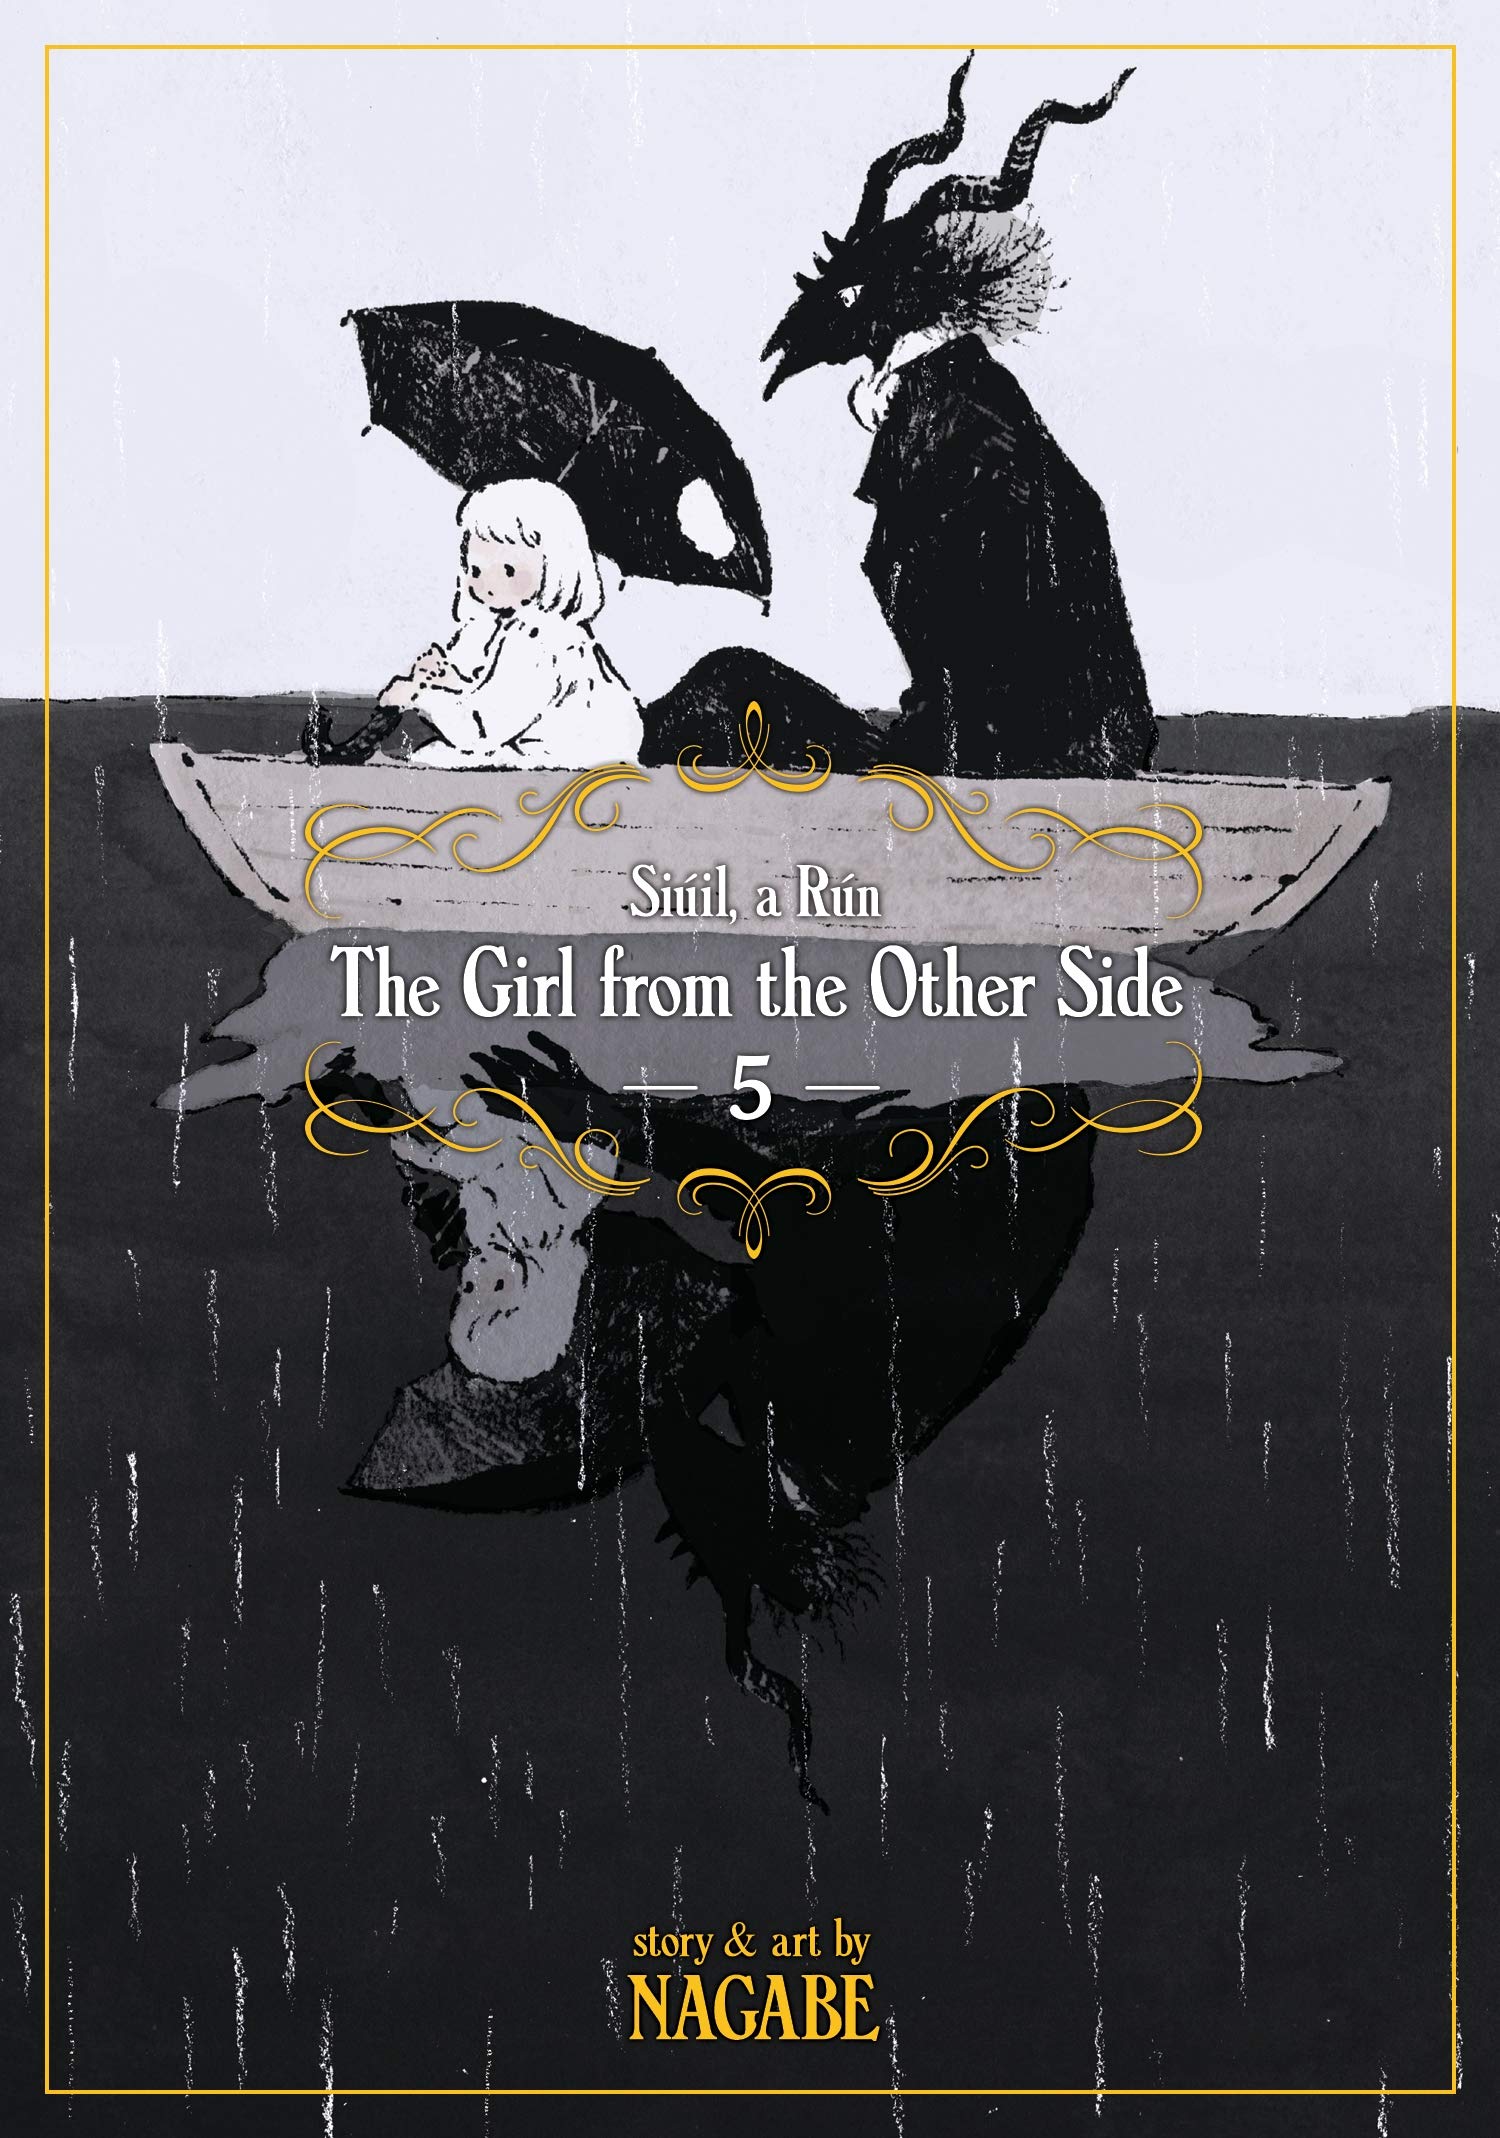 The Girl from the Other Side: Siuil, a Run. Volume 5 | Nagabe